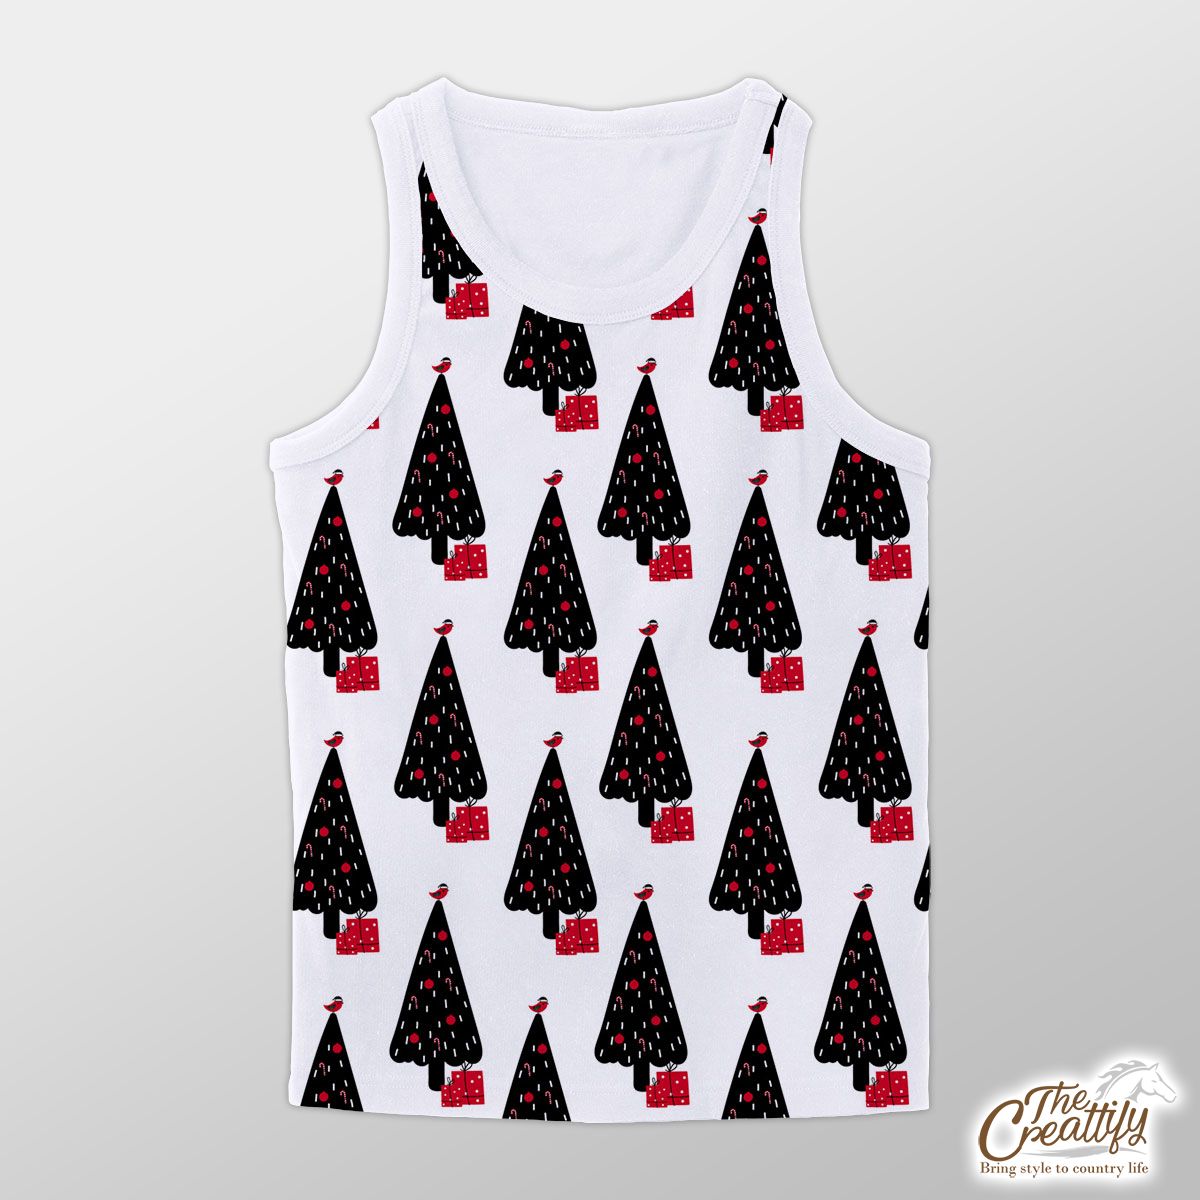 Hand Draw Christmas Gift And Pine Tree Silhouette Seamless White Pattern Unisex Tank Top